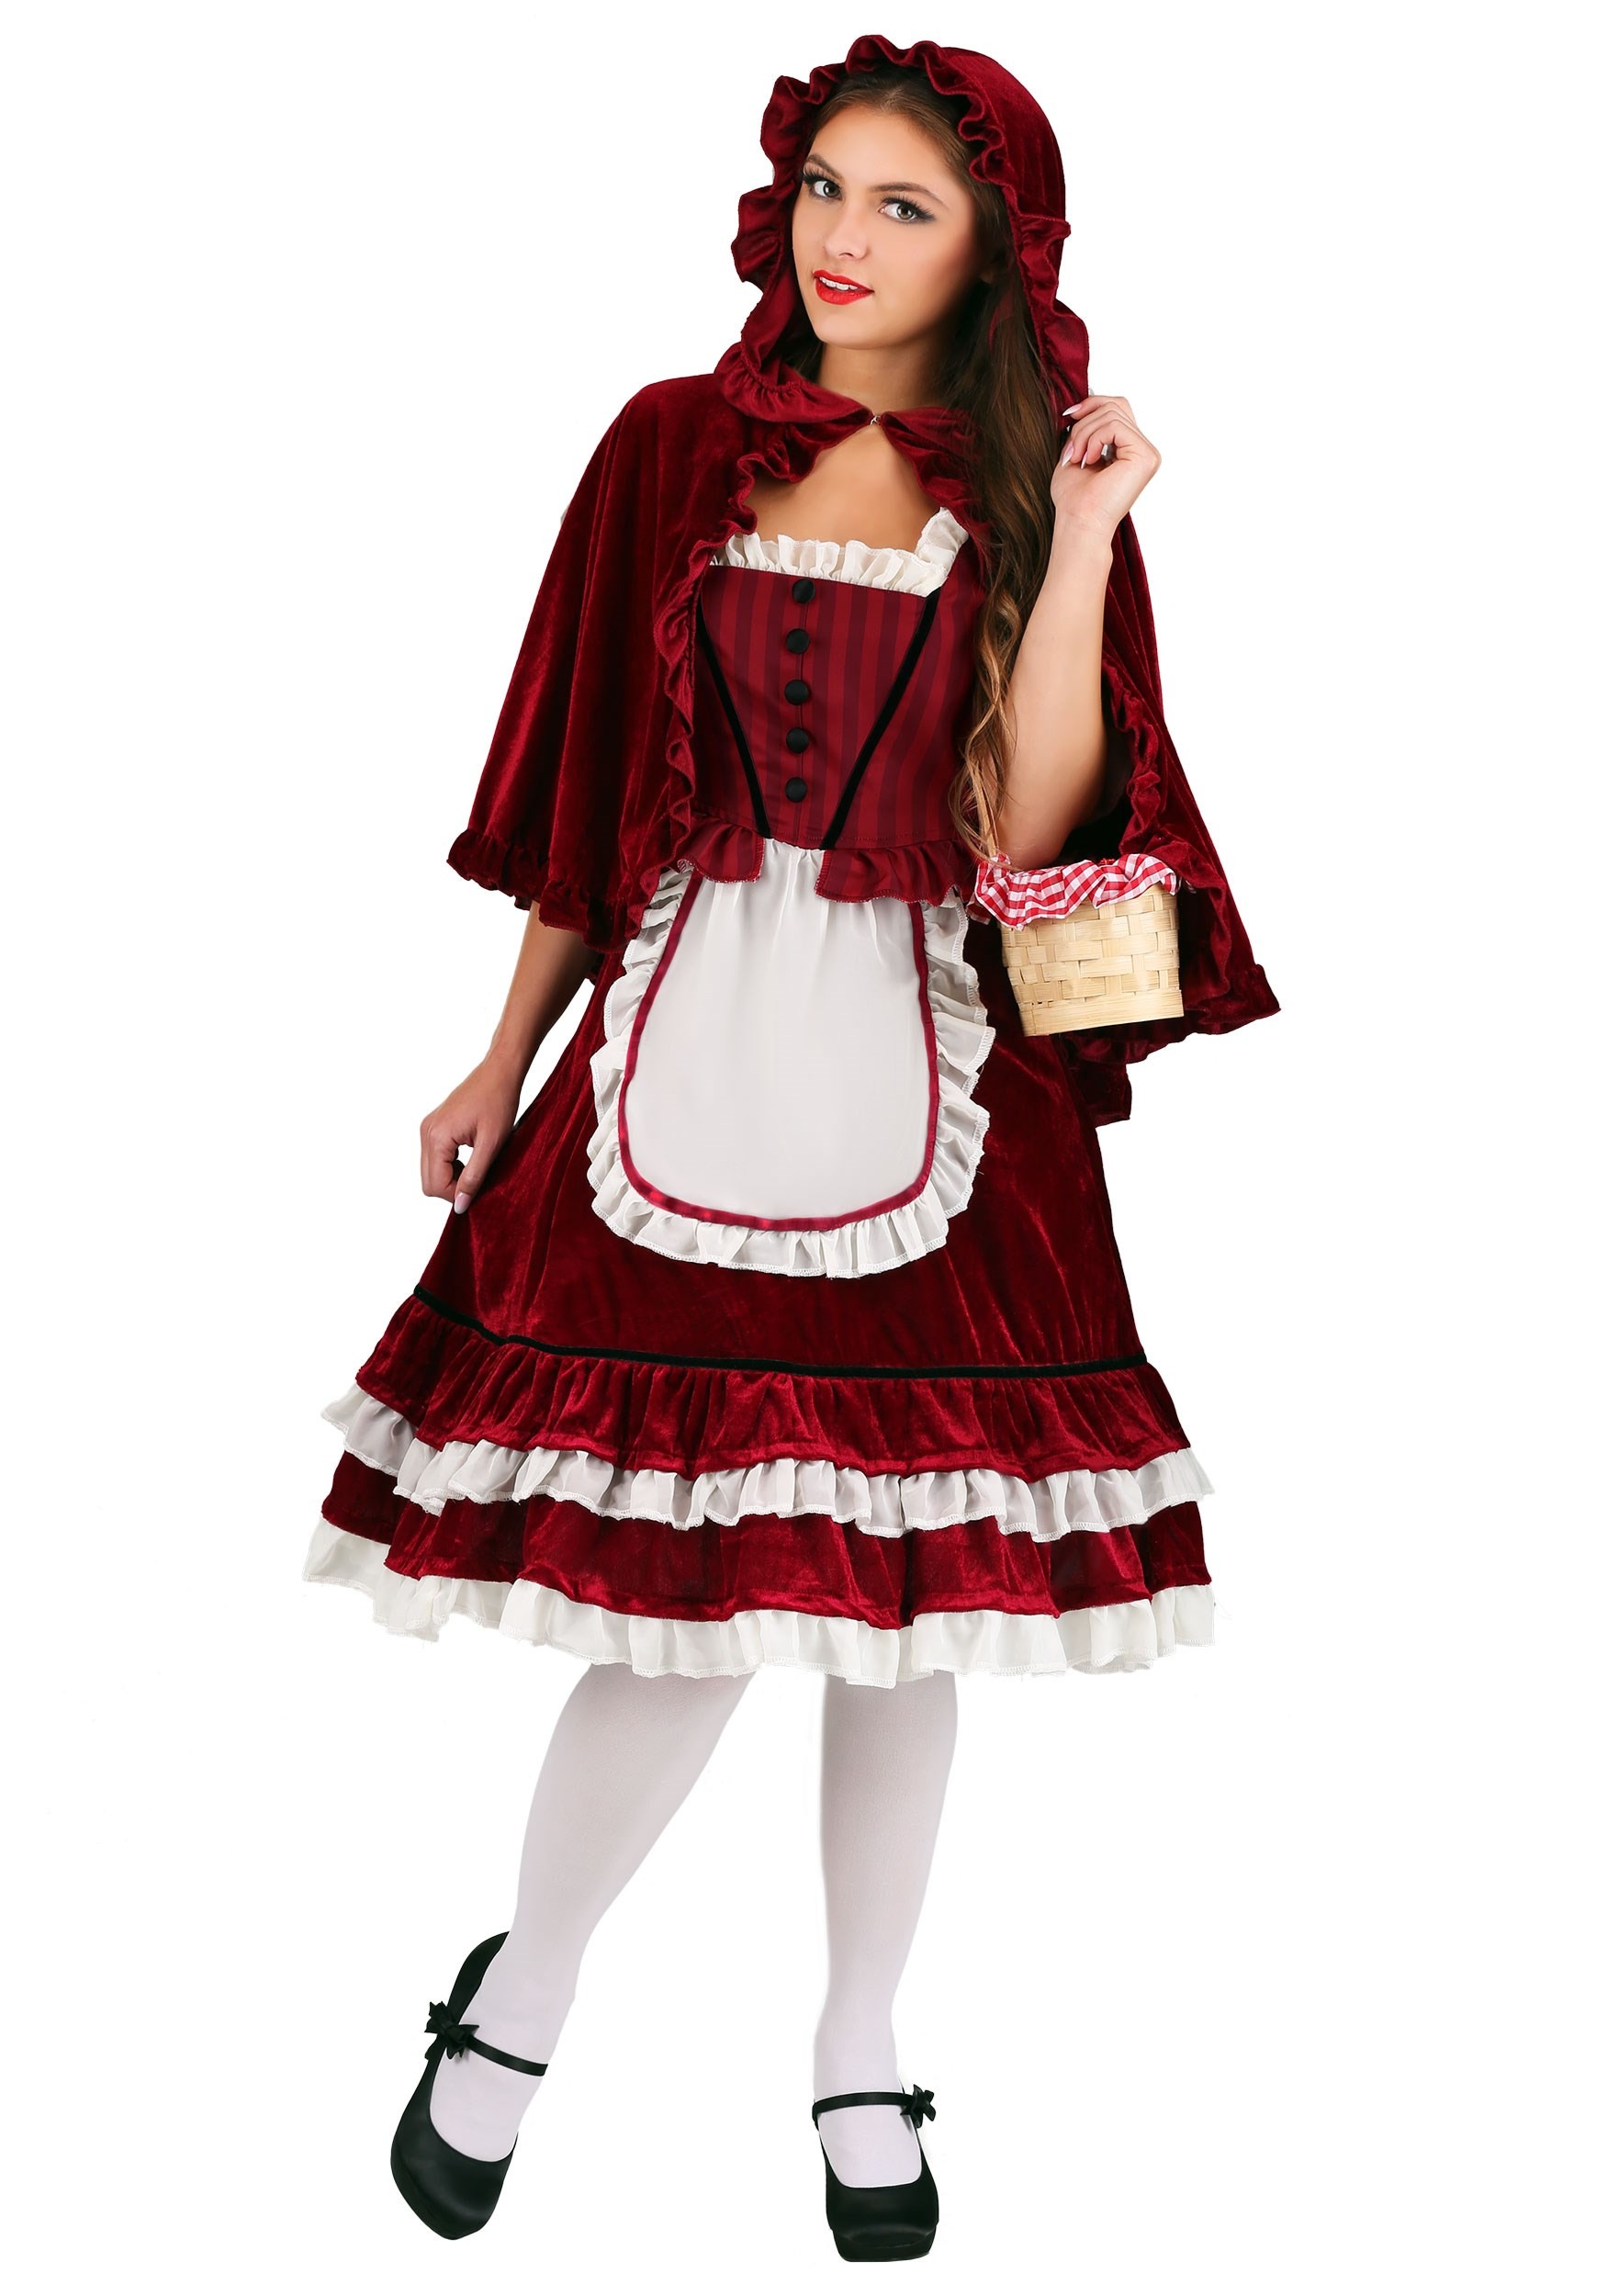 Classic Red Riding Hood Costume For Women 0541